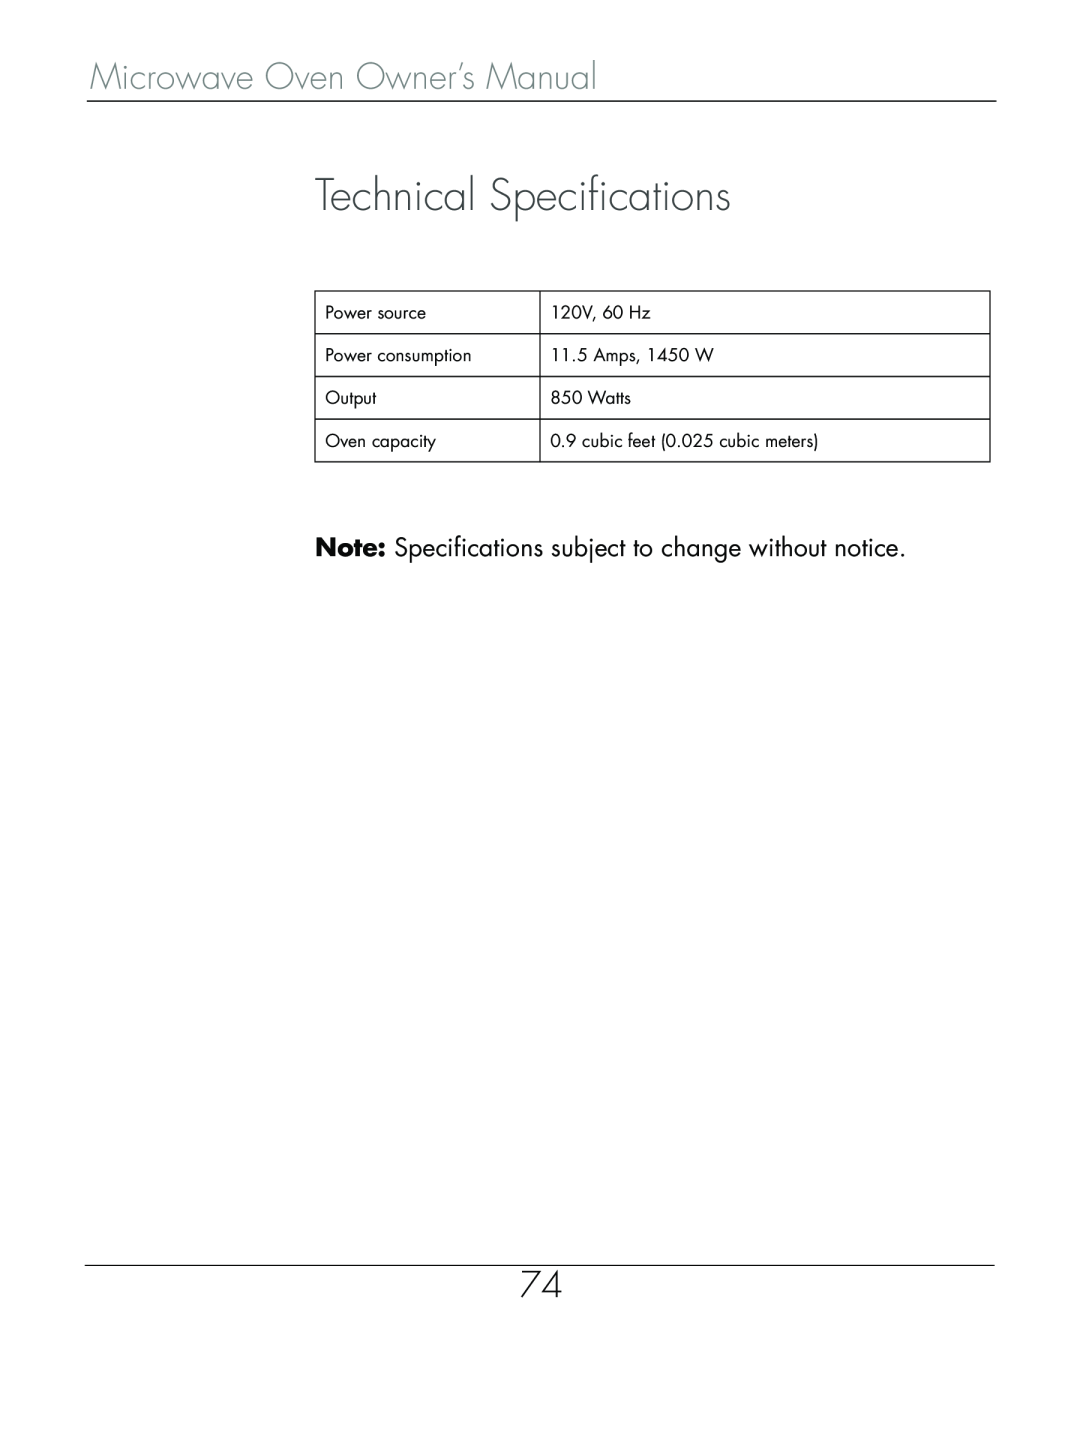 Beyond Microwace Oven manual Technical Specifications, Note Specifications subject to change without notice 